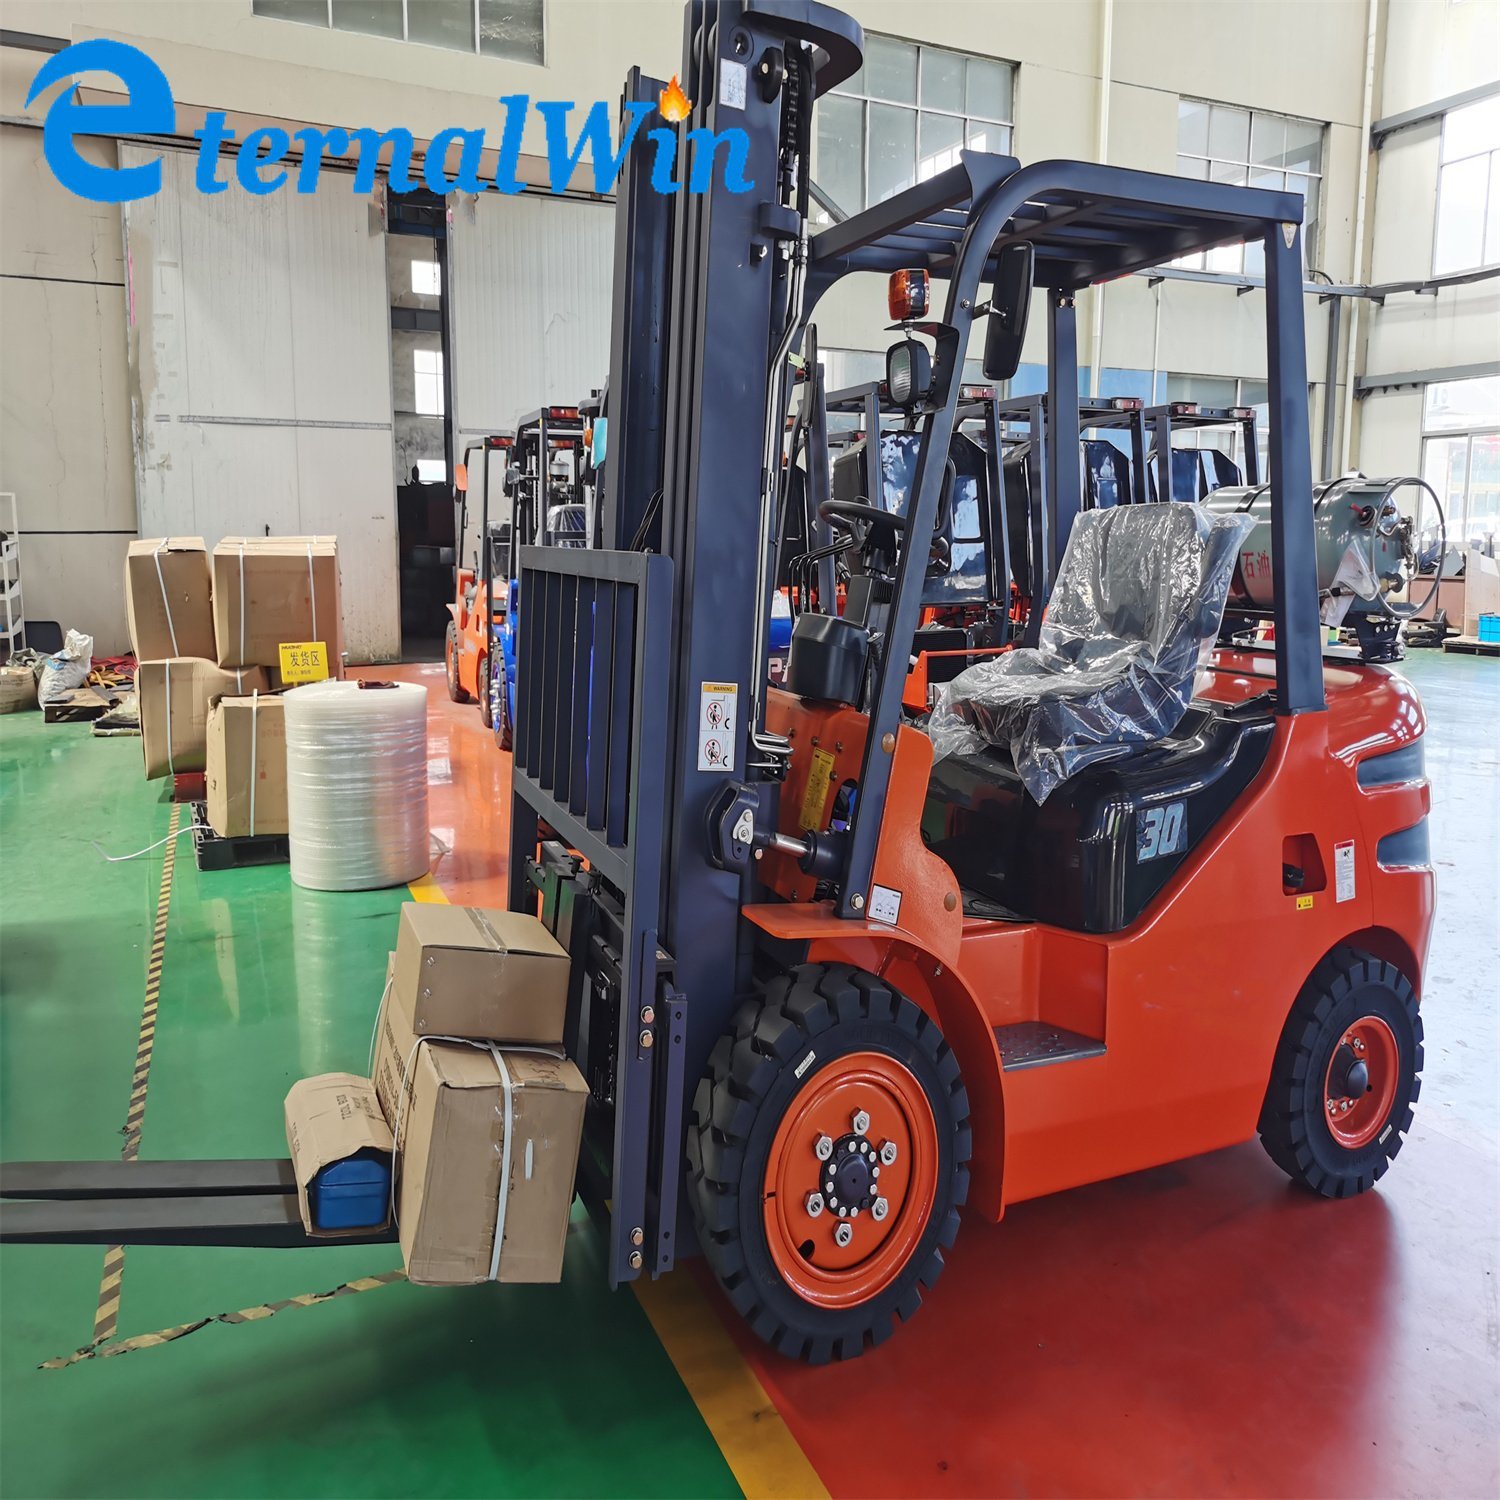 
                Best Chinese Forklift CPC50 Self Loading Forklifts Transmission Parts Supplier 3.5 Ton 2.5 1.5 Gas LPG Gasoline Forklift Handling with 2-3ton Manual Battery
            